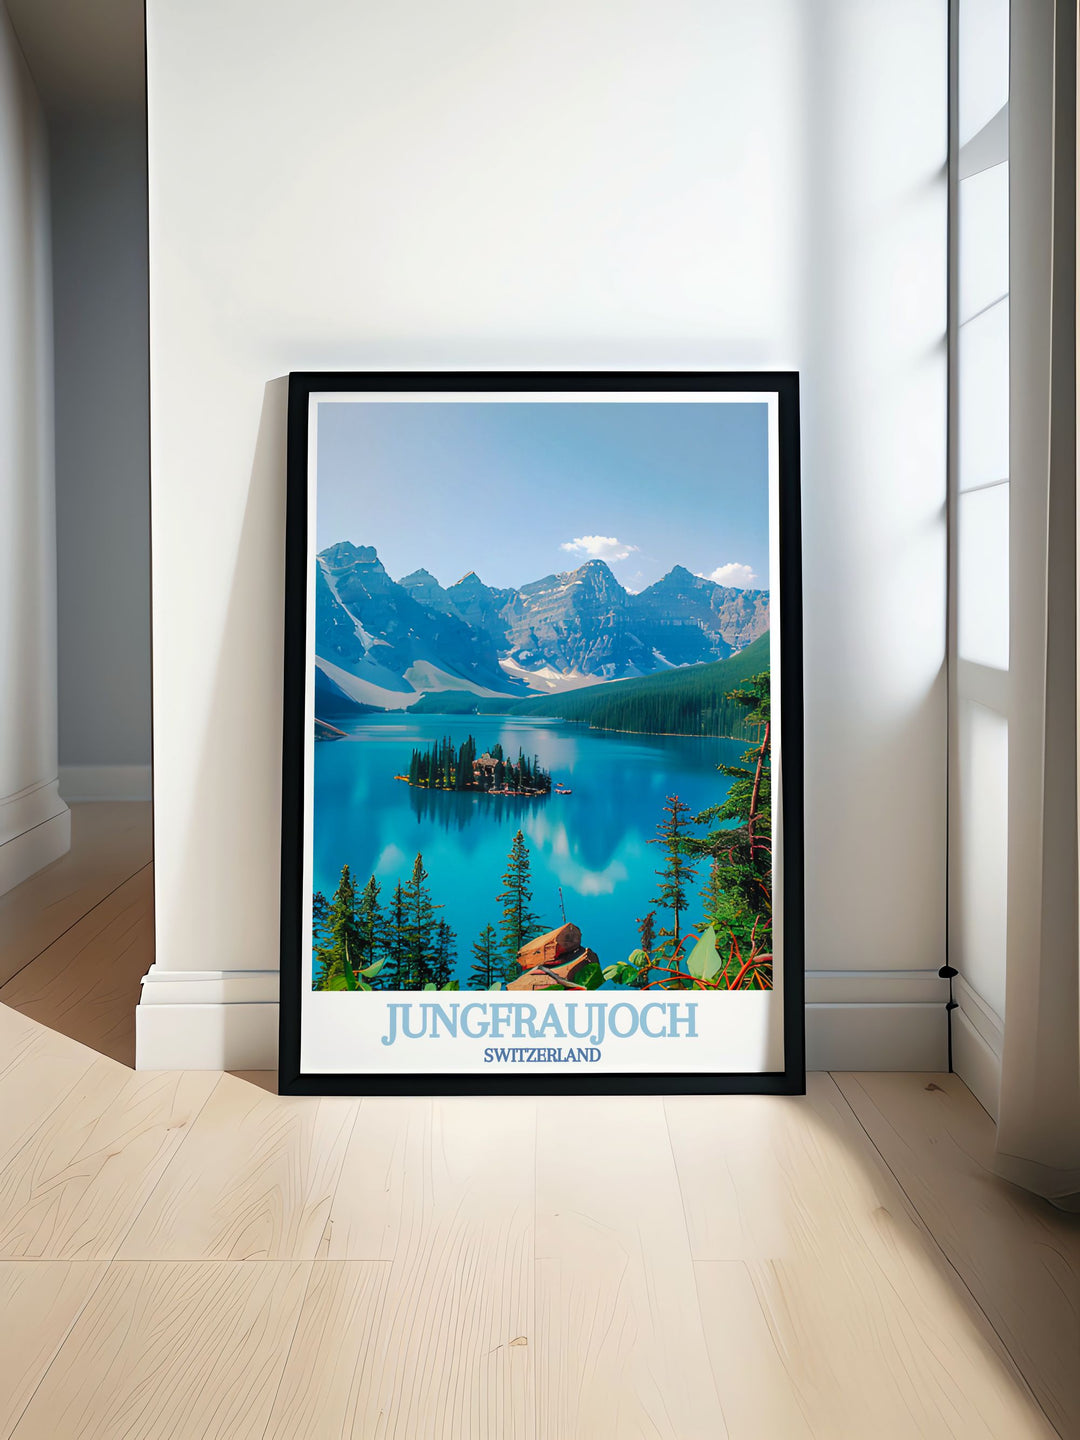 Art print showcasing the engineering marvel of the Jungfraujoch railway, set against the stunning alpine scenery, ideal for travel and history enthusiasts.